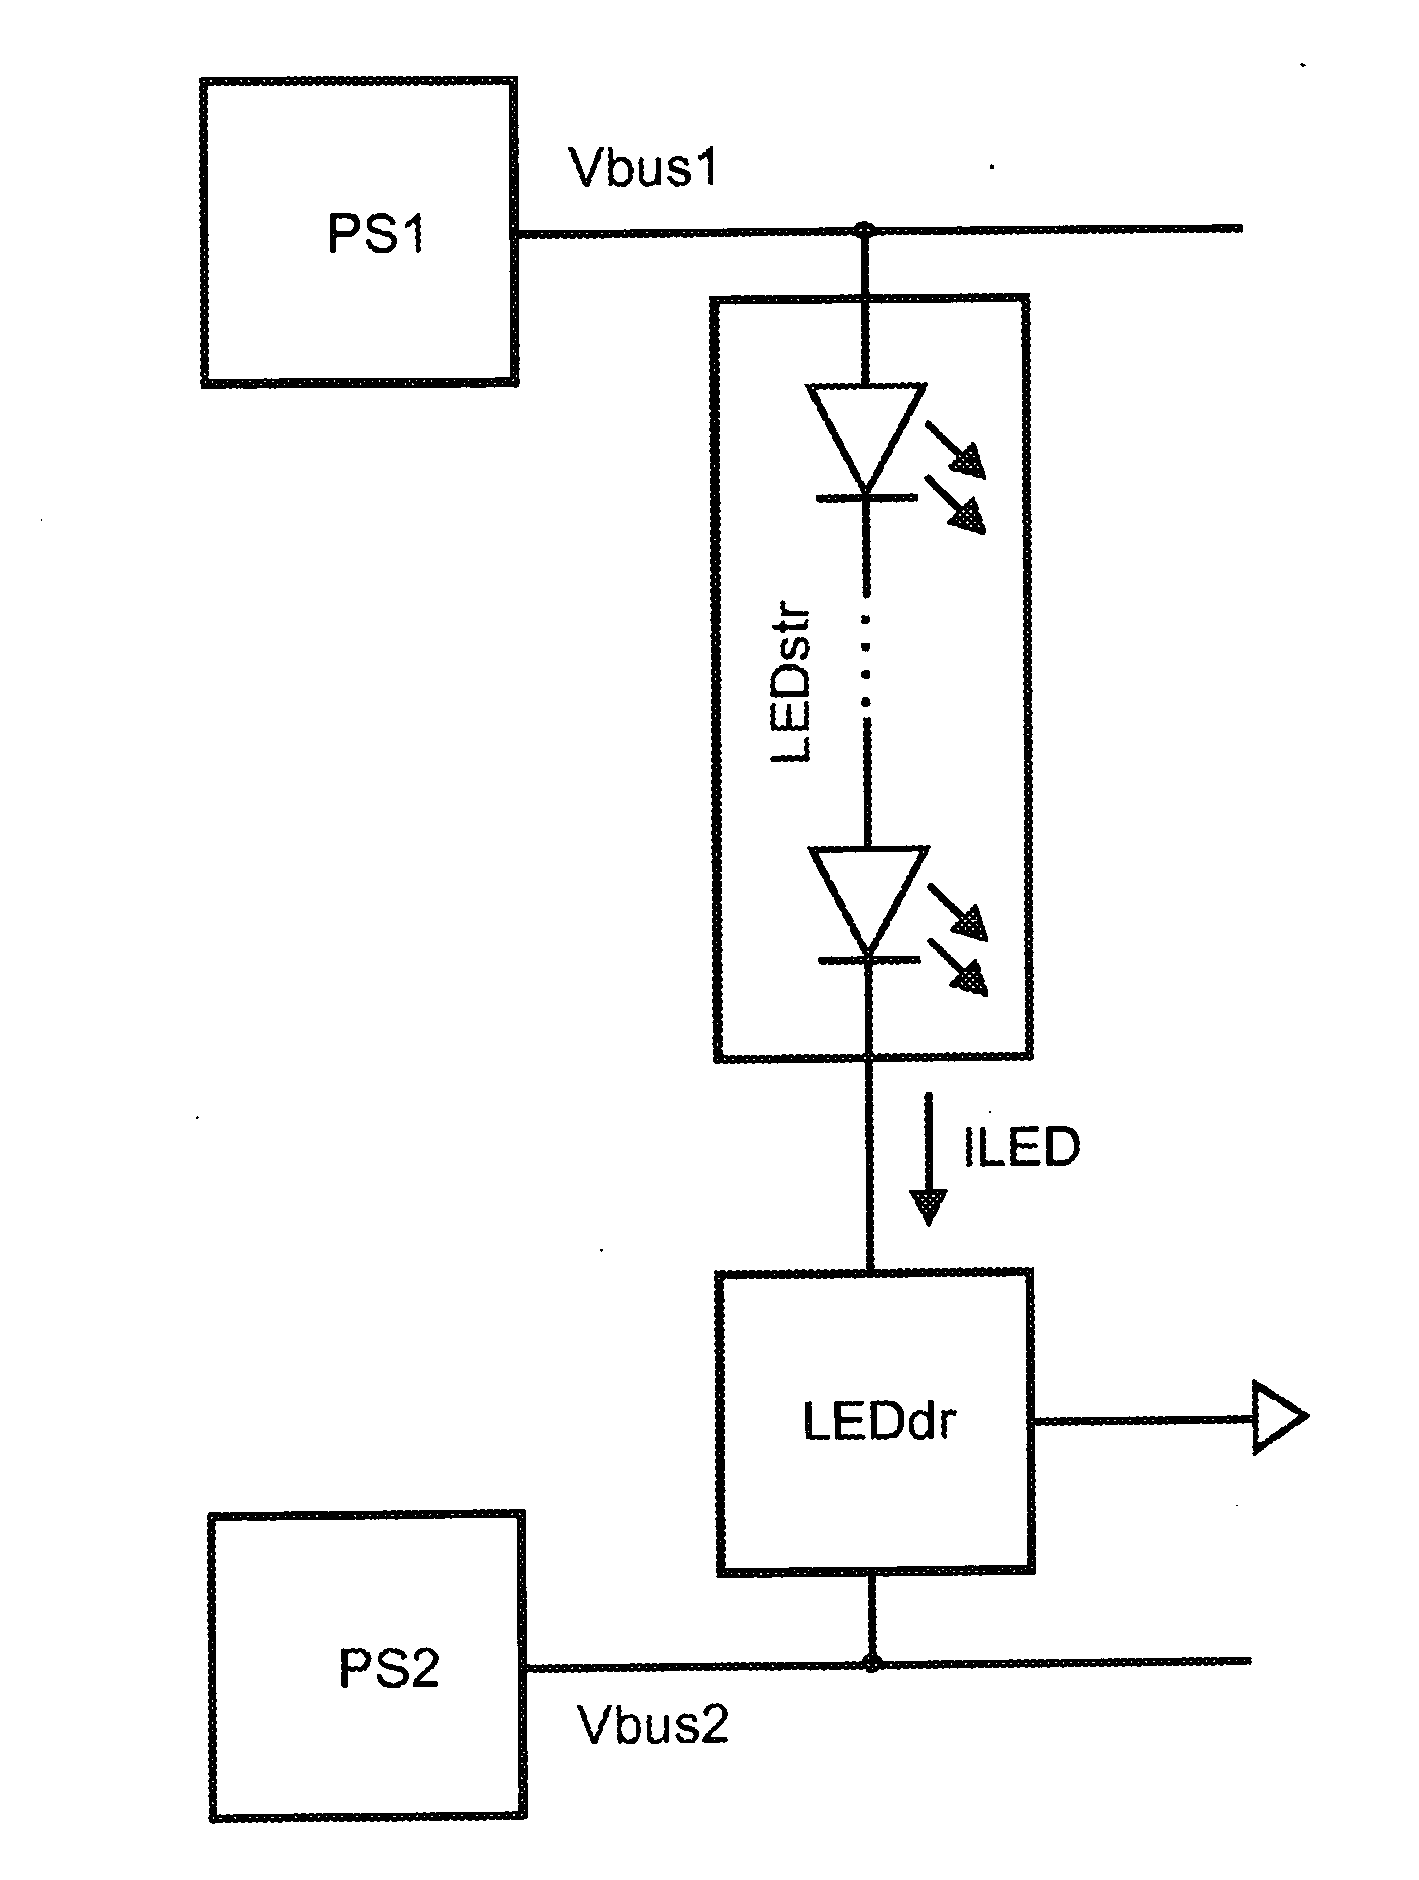 Solid state lighting system and a driver integrated circuit for driving light emitting semiconductor devices